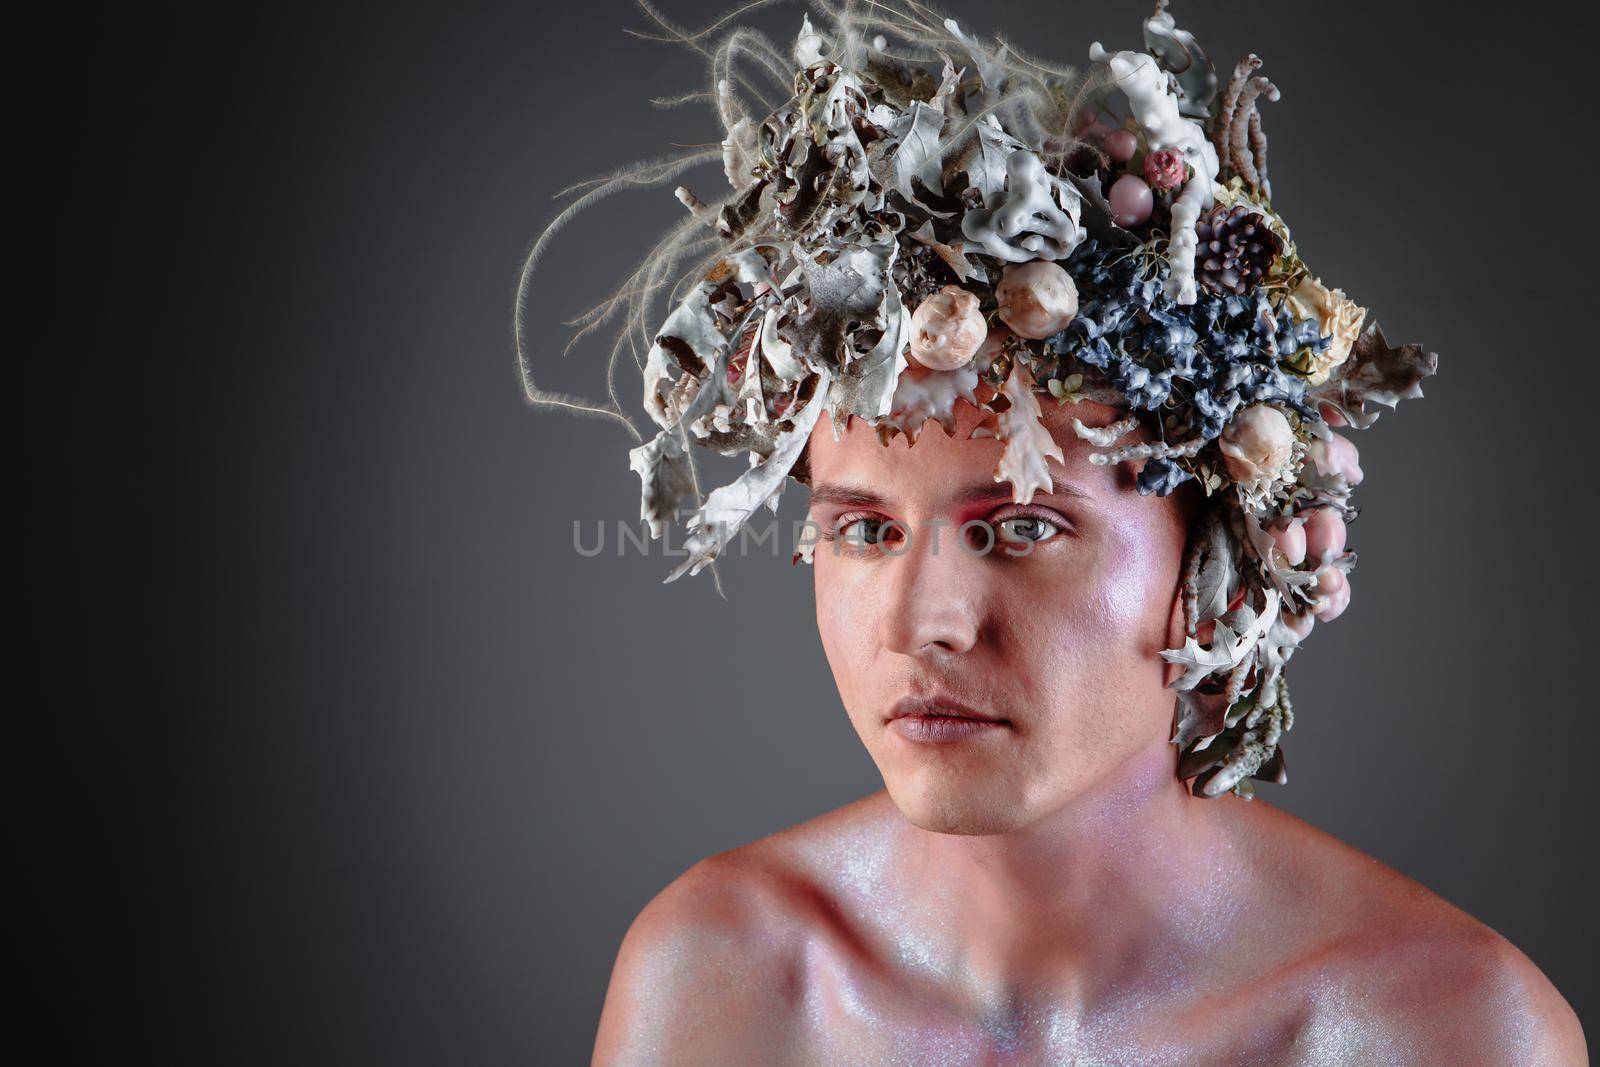 The face of a male model in a headdress of fresh flowers filled with wax